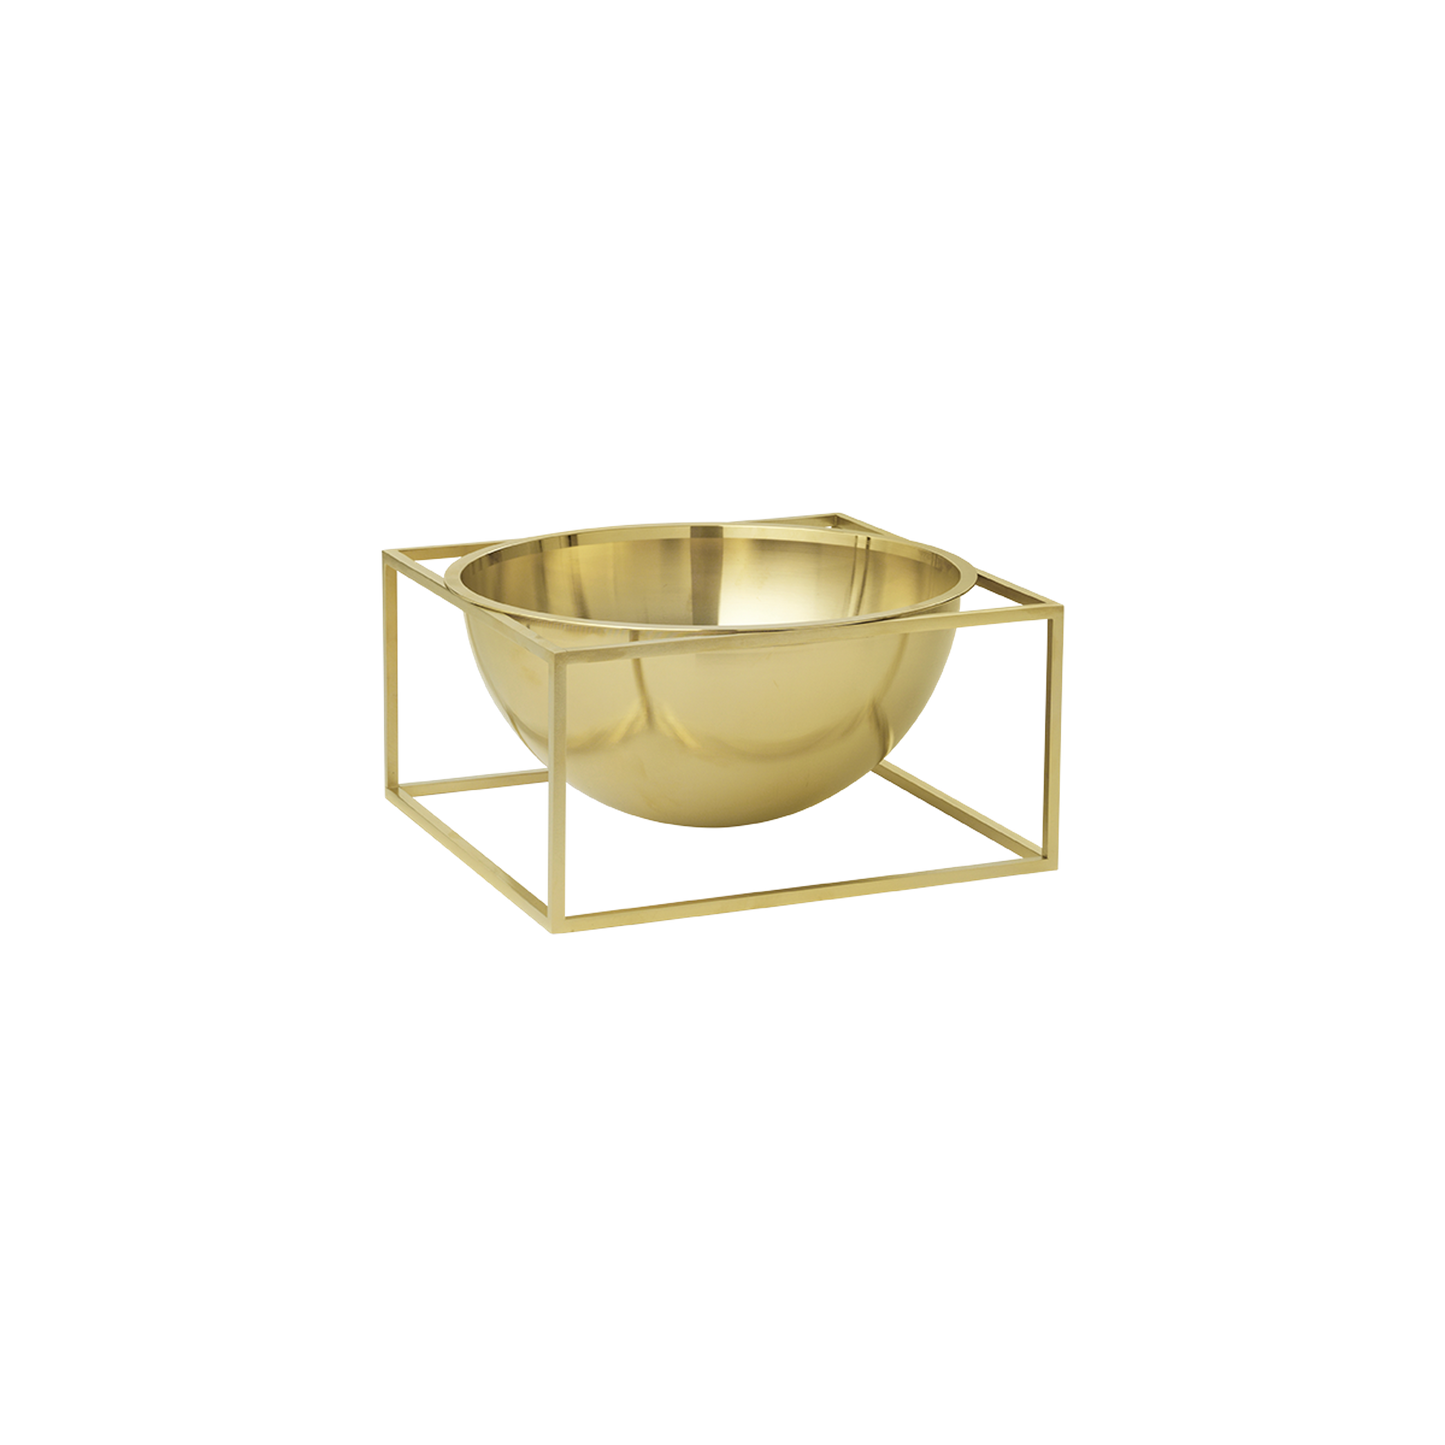 Bowl Centerpiece Large by Audo #Gold Plated